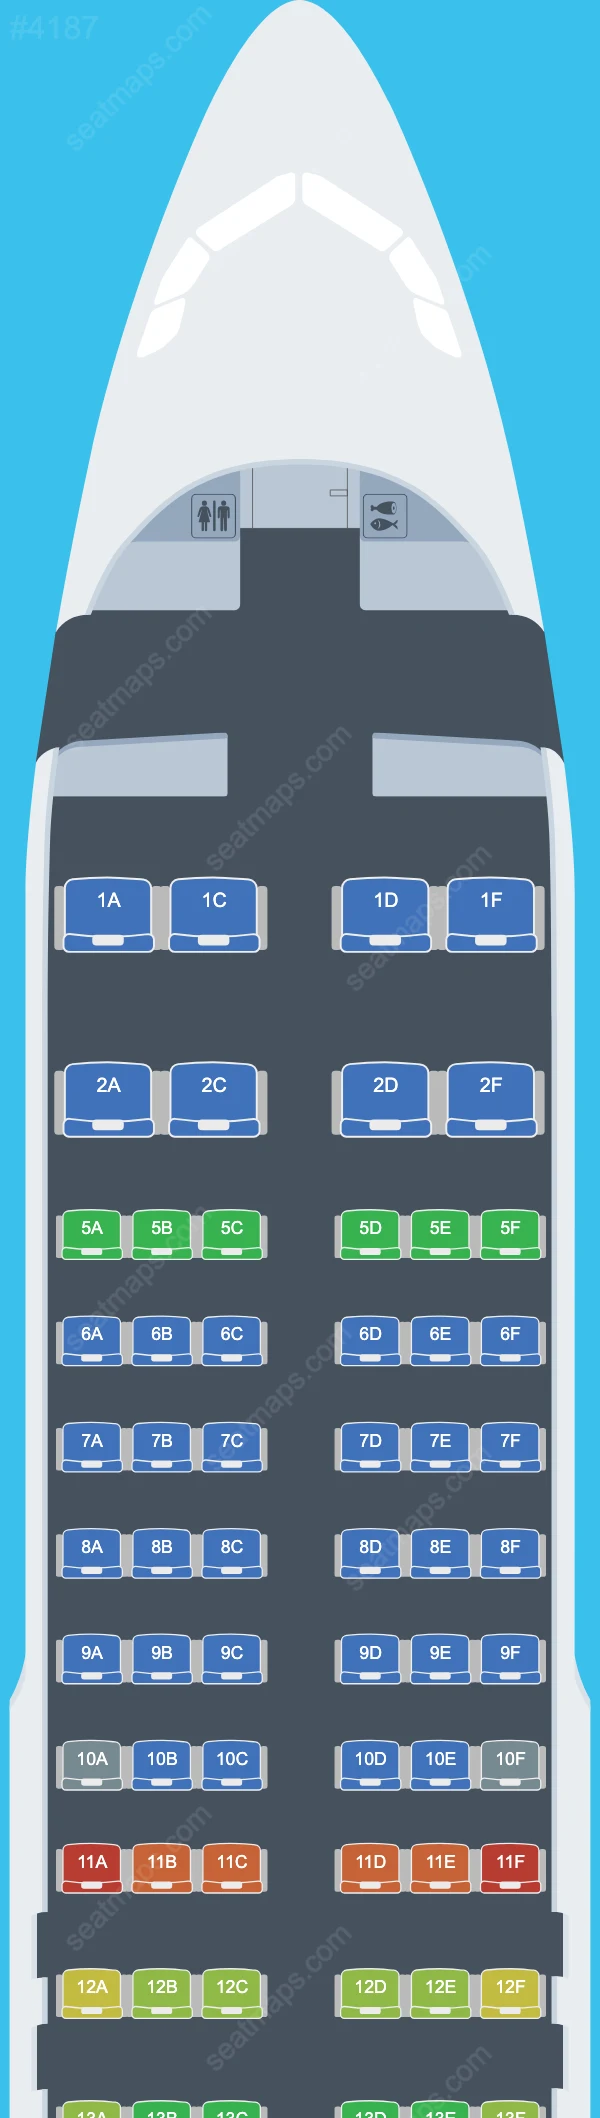 Flynas Airbus A320 Seat Maps A320-200